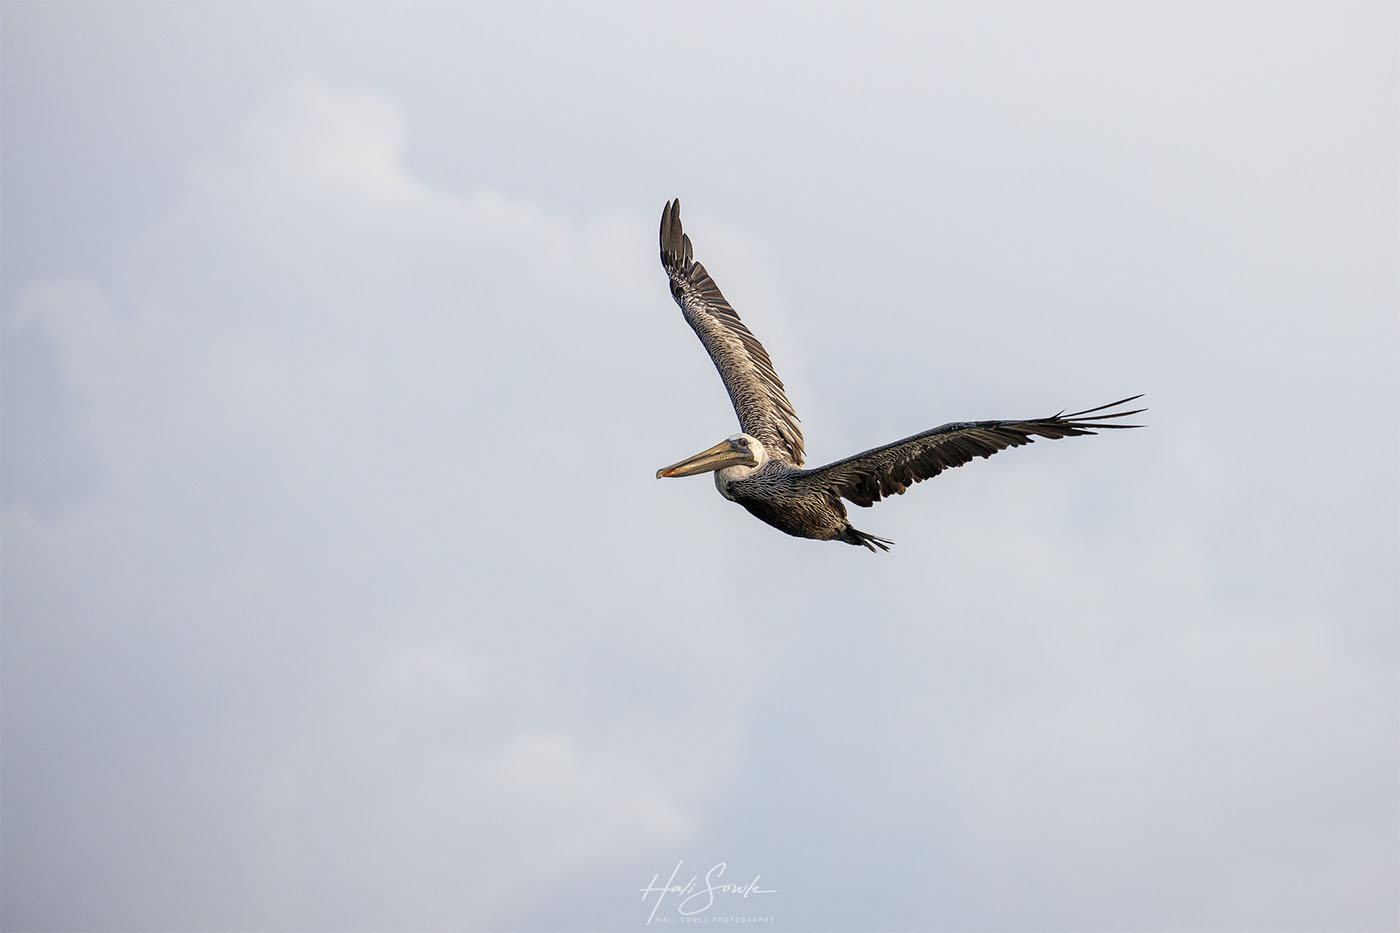 2019_09_Sandals-SouthCoast-10223-Edit1000.jpg - As always the Pelicans would fish in the waters off the beach, especially in the area near the over-the-water butler suites.  We spent a little time one afternoon practicing our bird-in-flight photography.